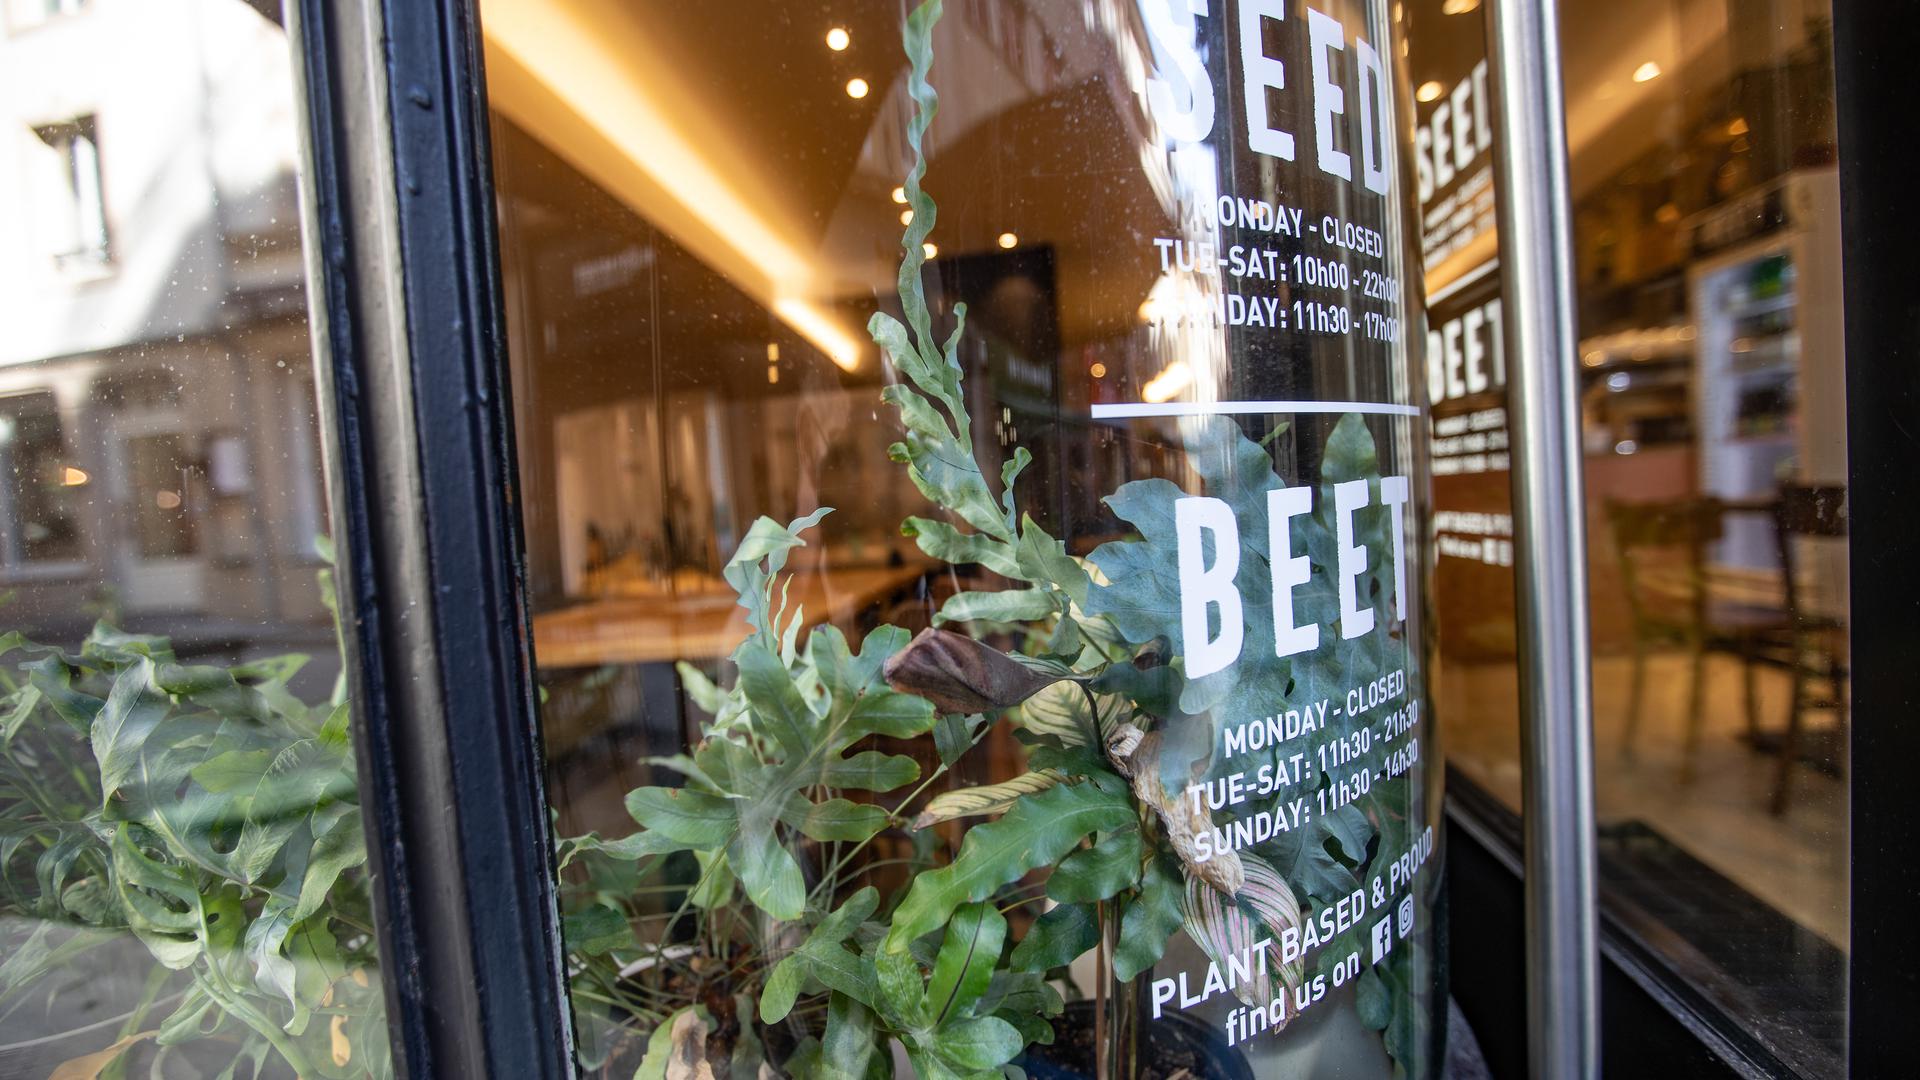 Beet is happy to adapt its burgers or mac 'n' cheese to gluten-free